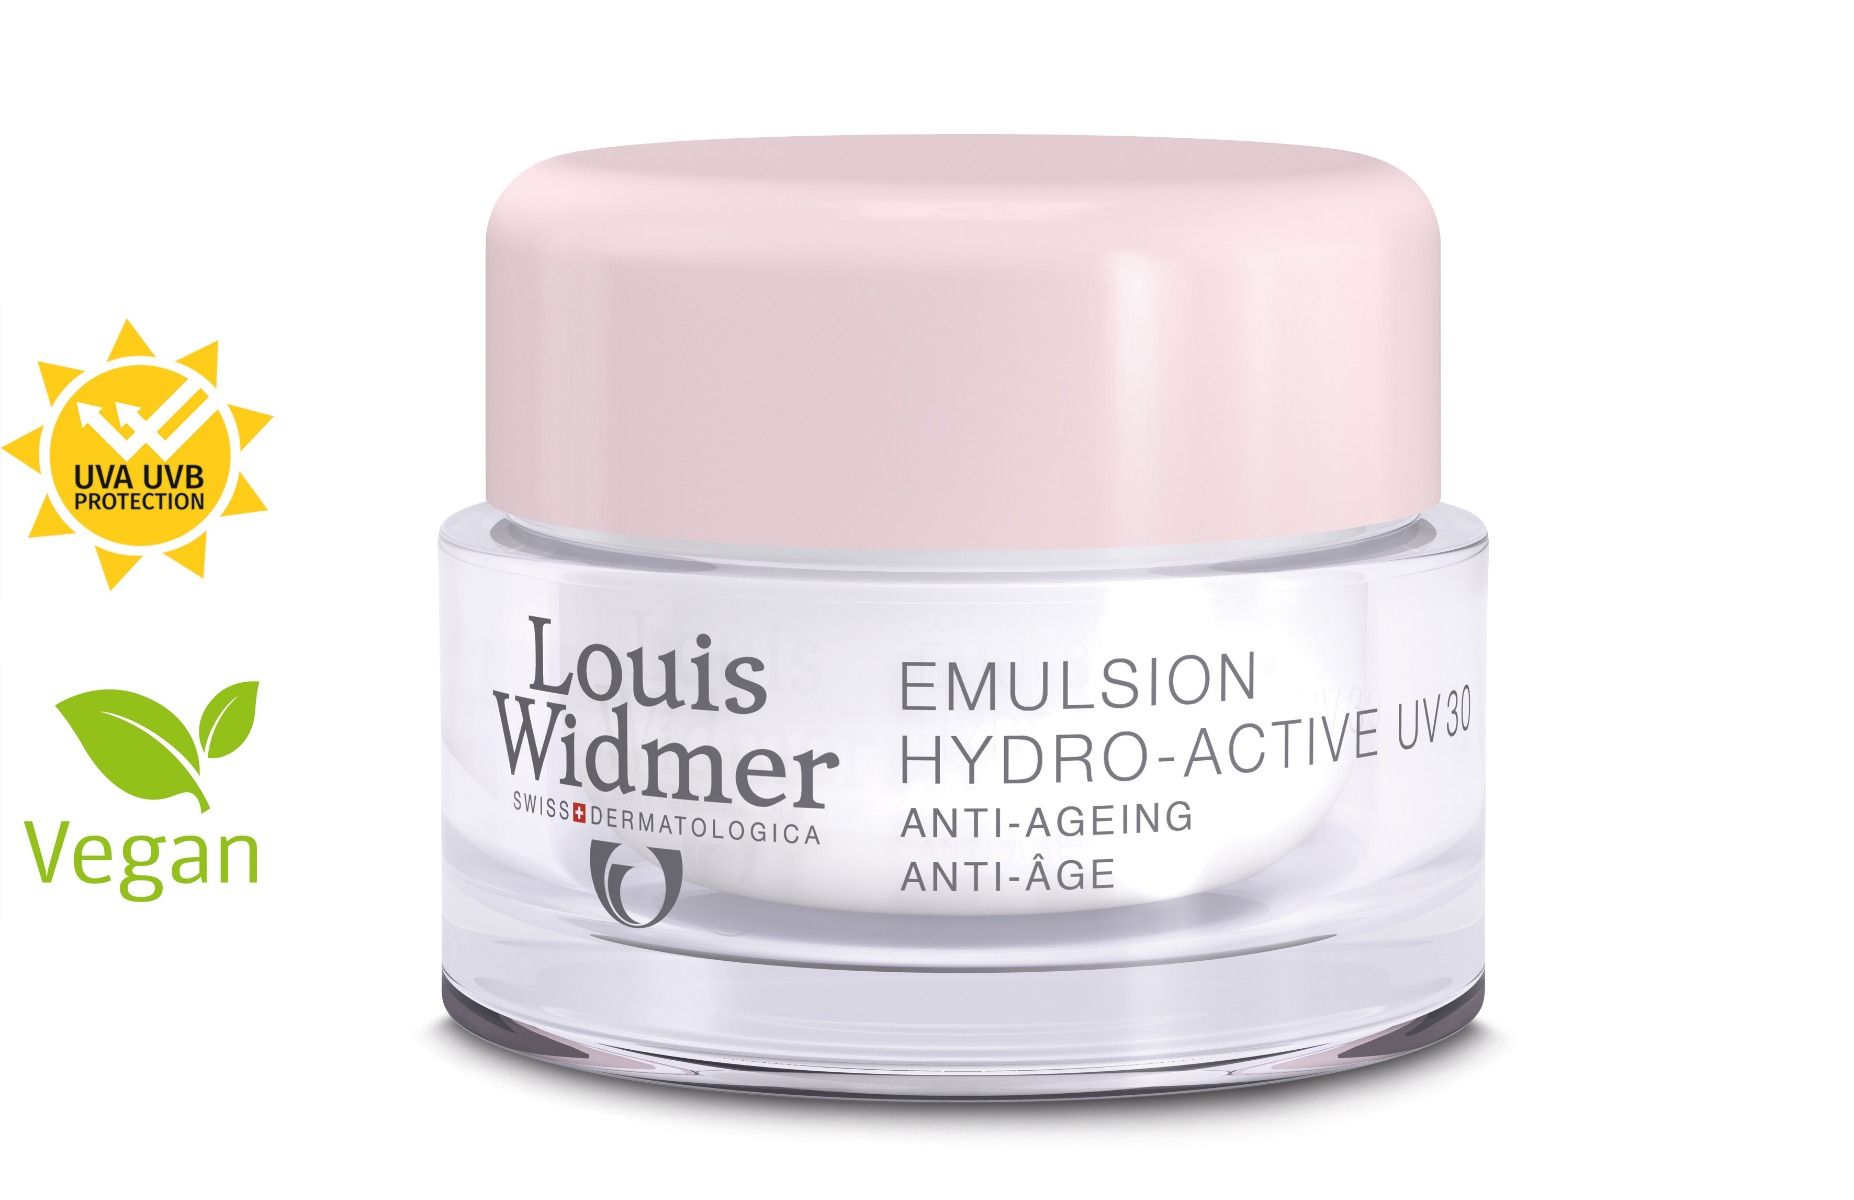 LOUIS WIDMER Tagesemulsion Hydro-Active UV30